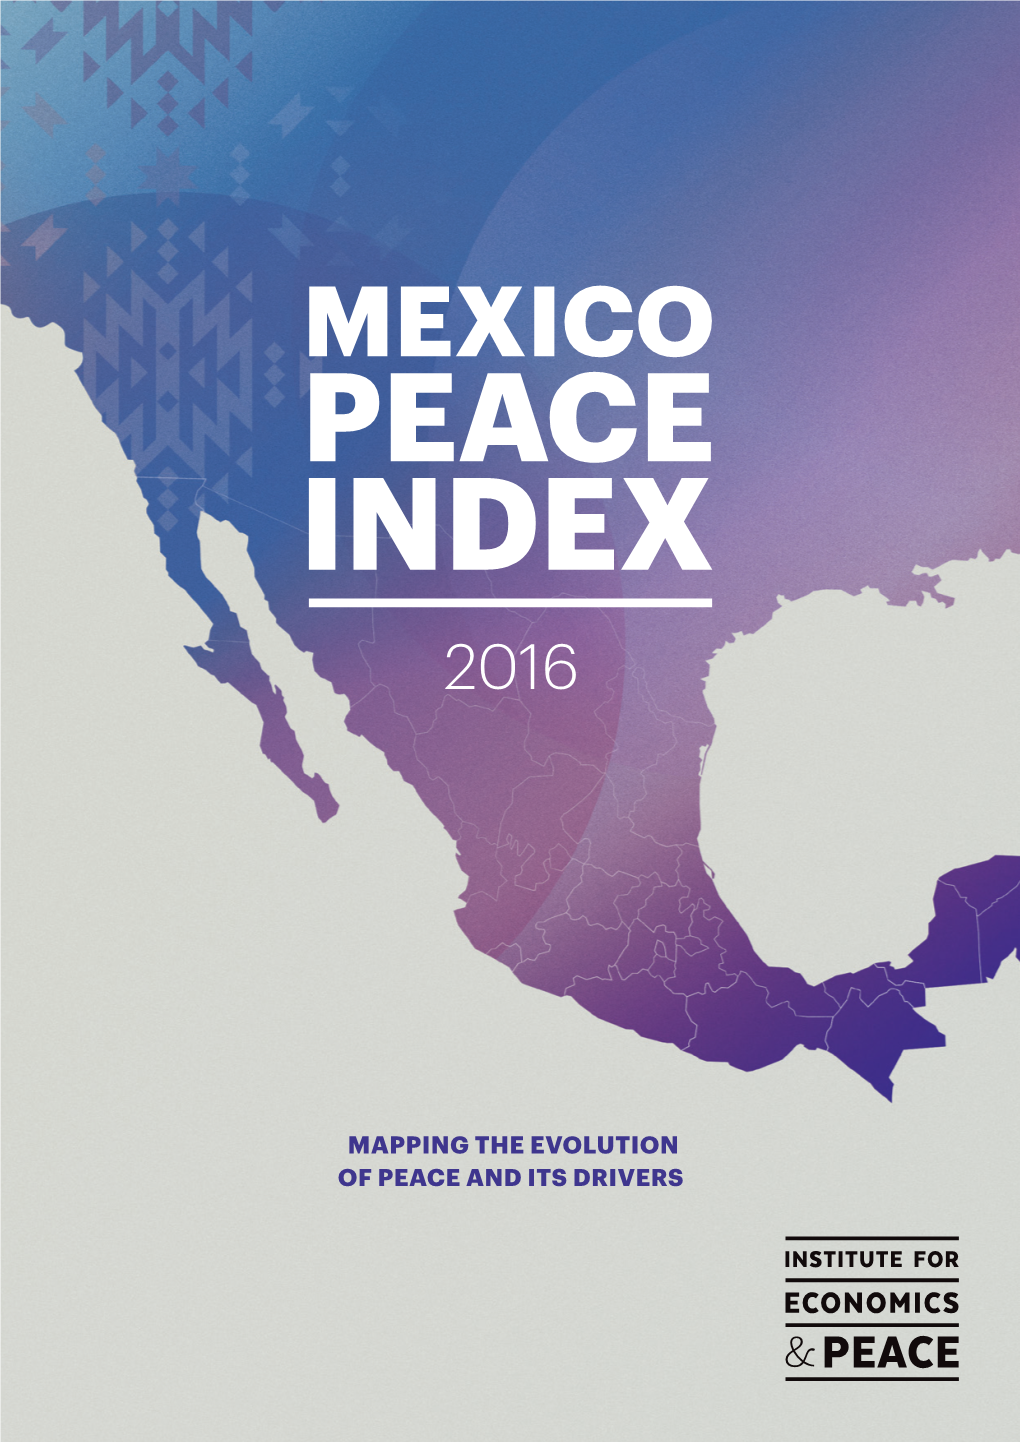 Mexico Peace Index 2016: Mapping the Evolution of Peace and Its Drivers